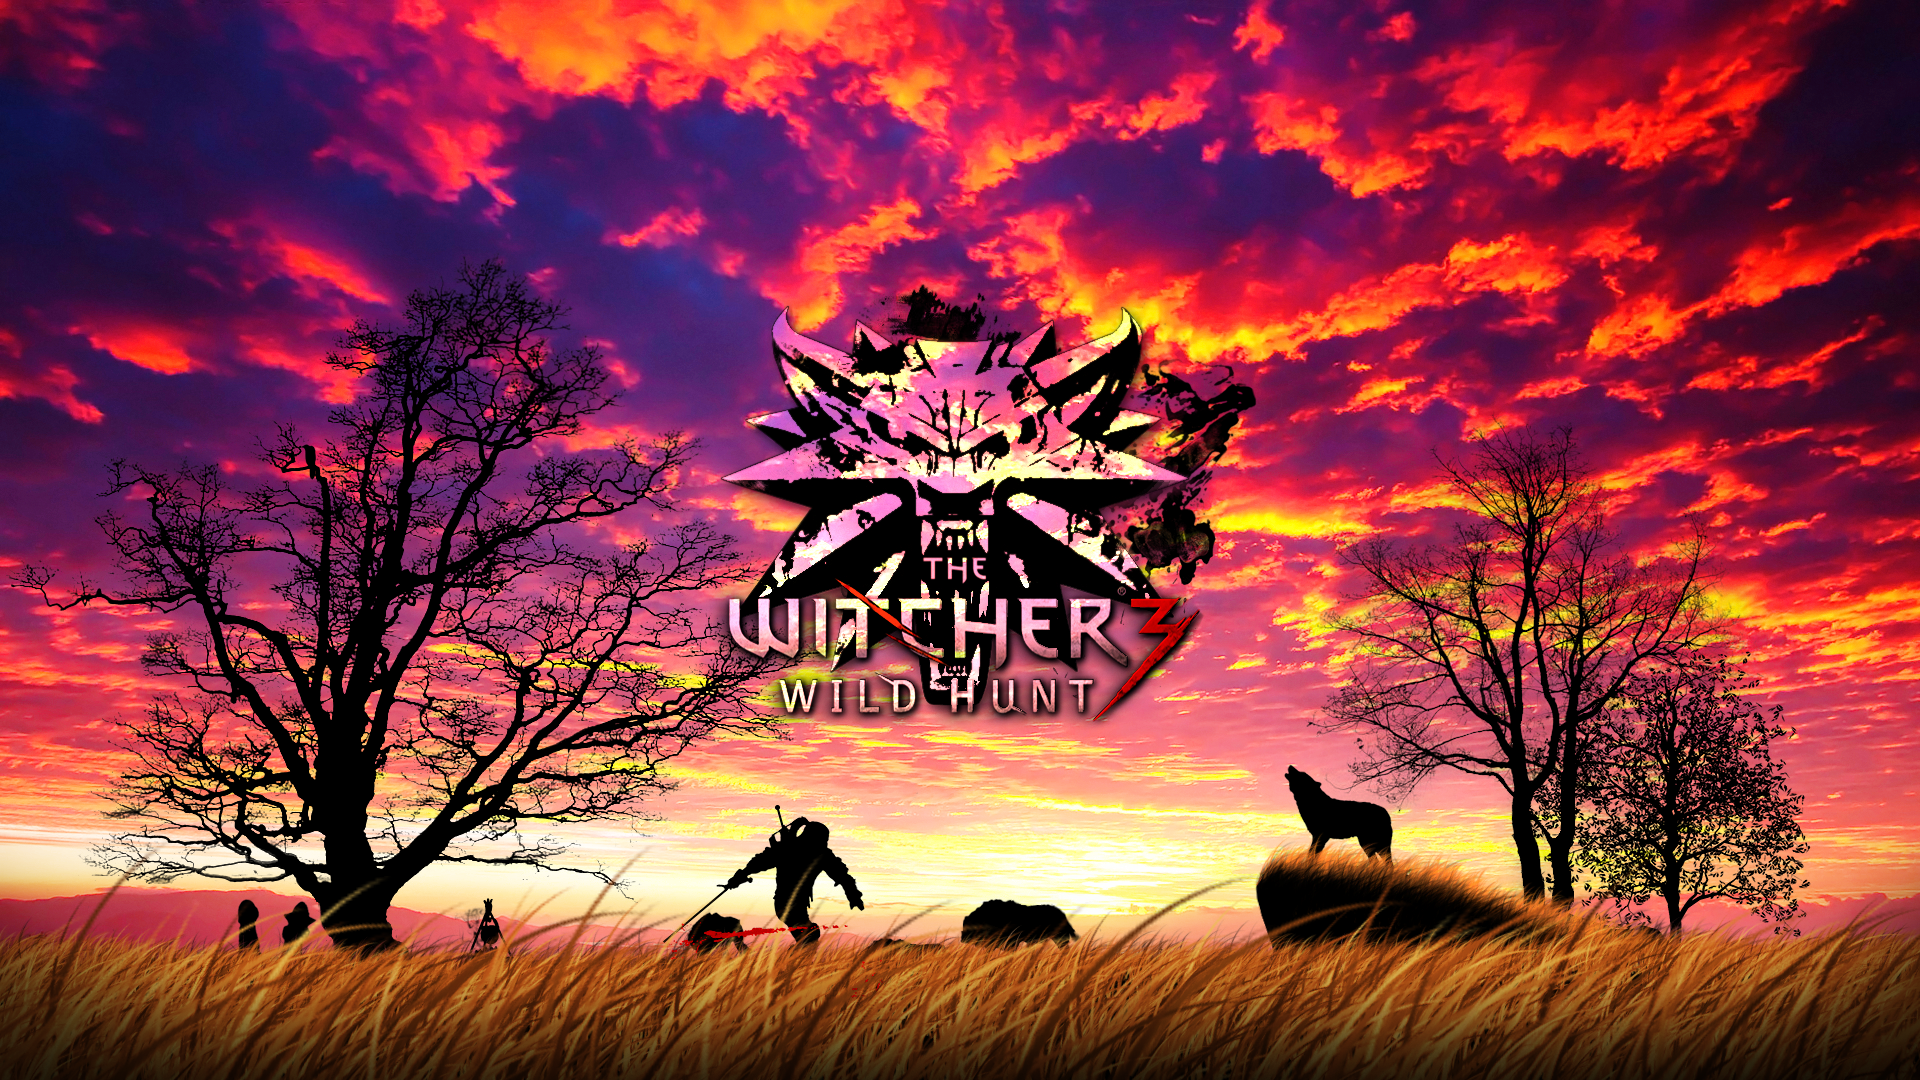 The Witcher 3 Wild Hunt Geralt Of Rivia Sunset Wolf Dry Grass Clouds Silhouette The Witcher 1920x1080